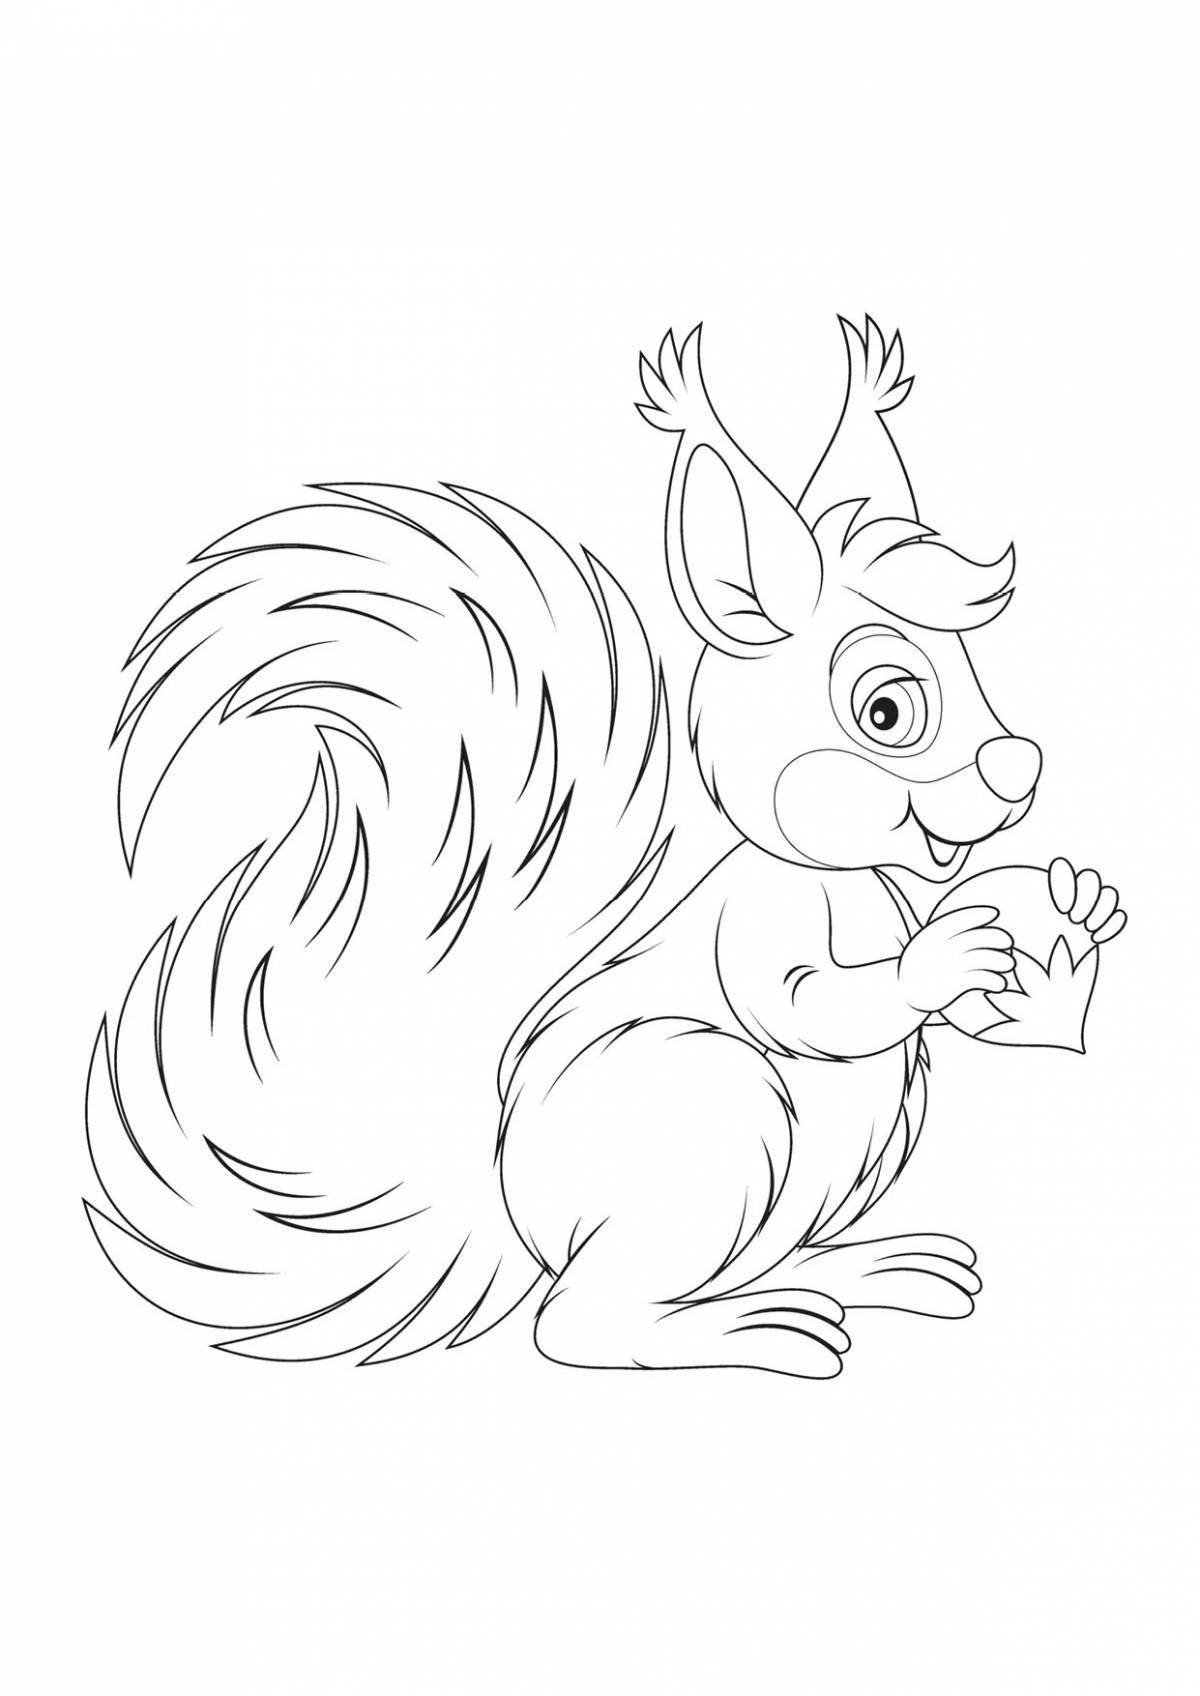 Witty squirrel coloring book for kids